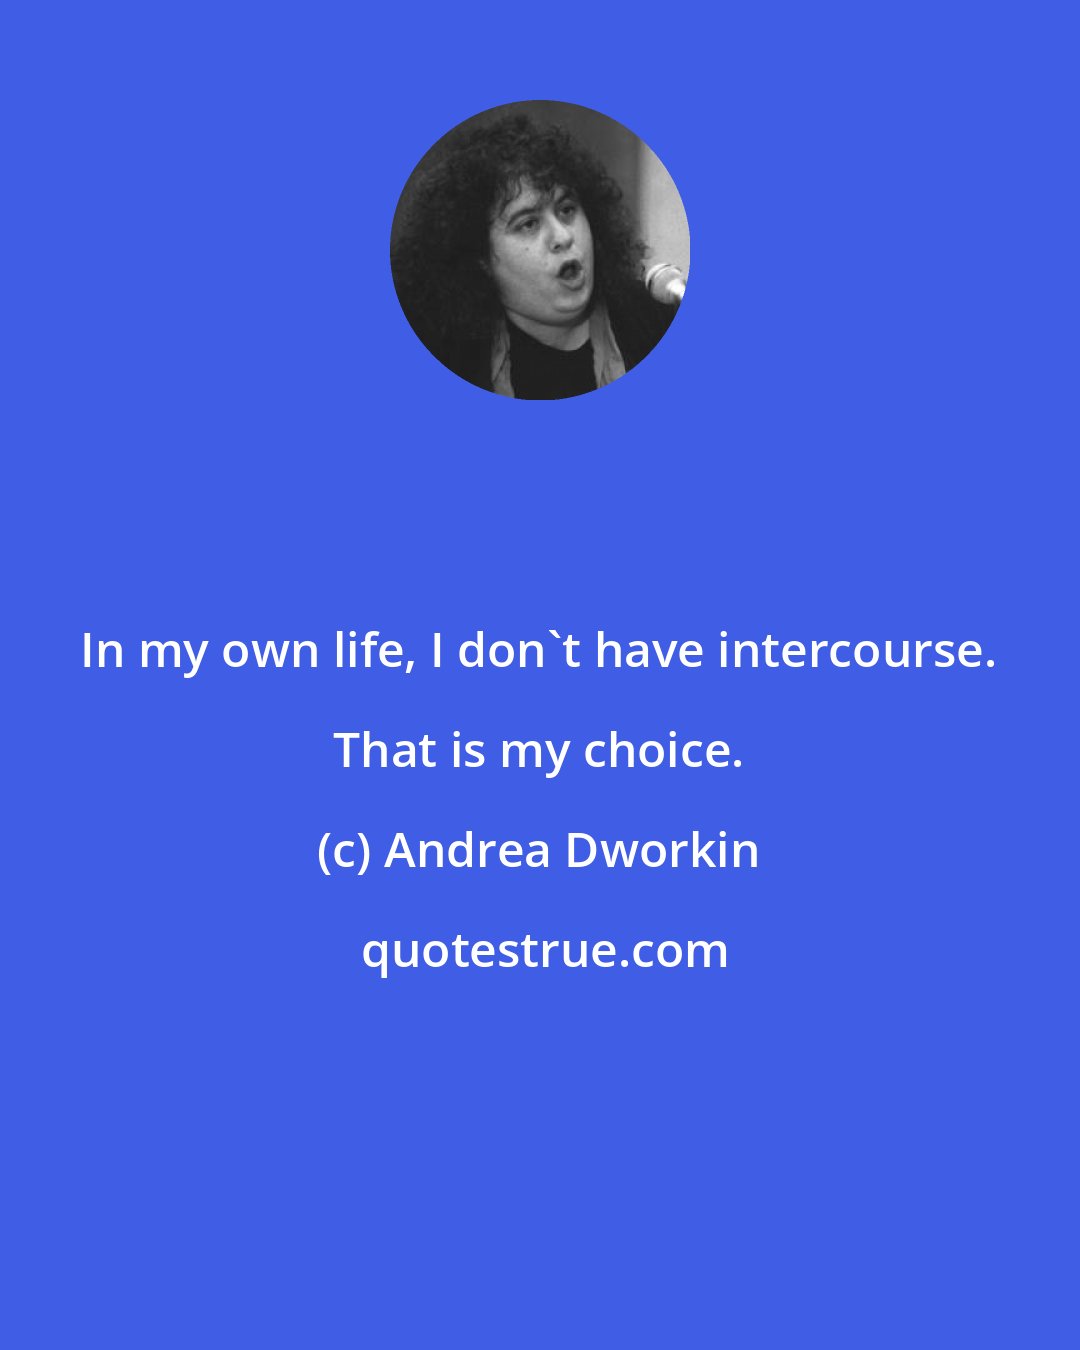 Andrea Dworkin: In my own life, I don't have intercourse. That is my choice.